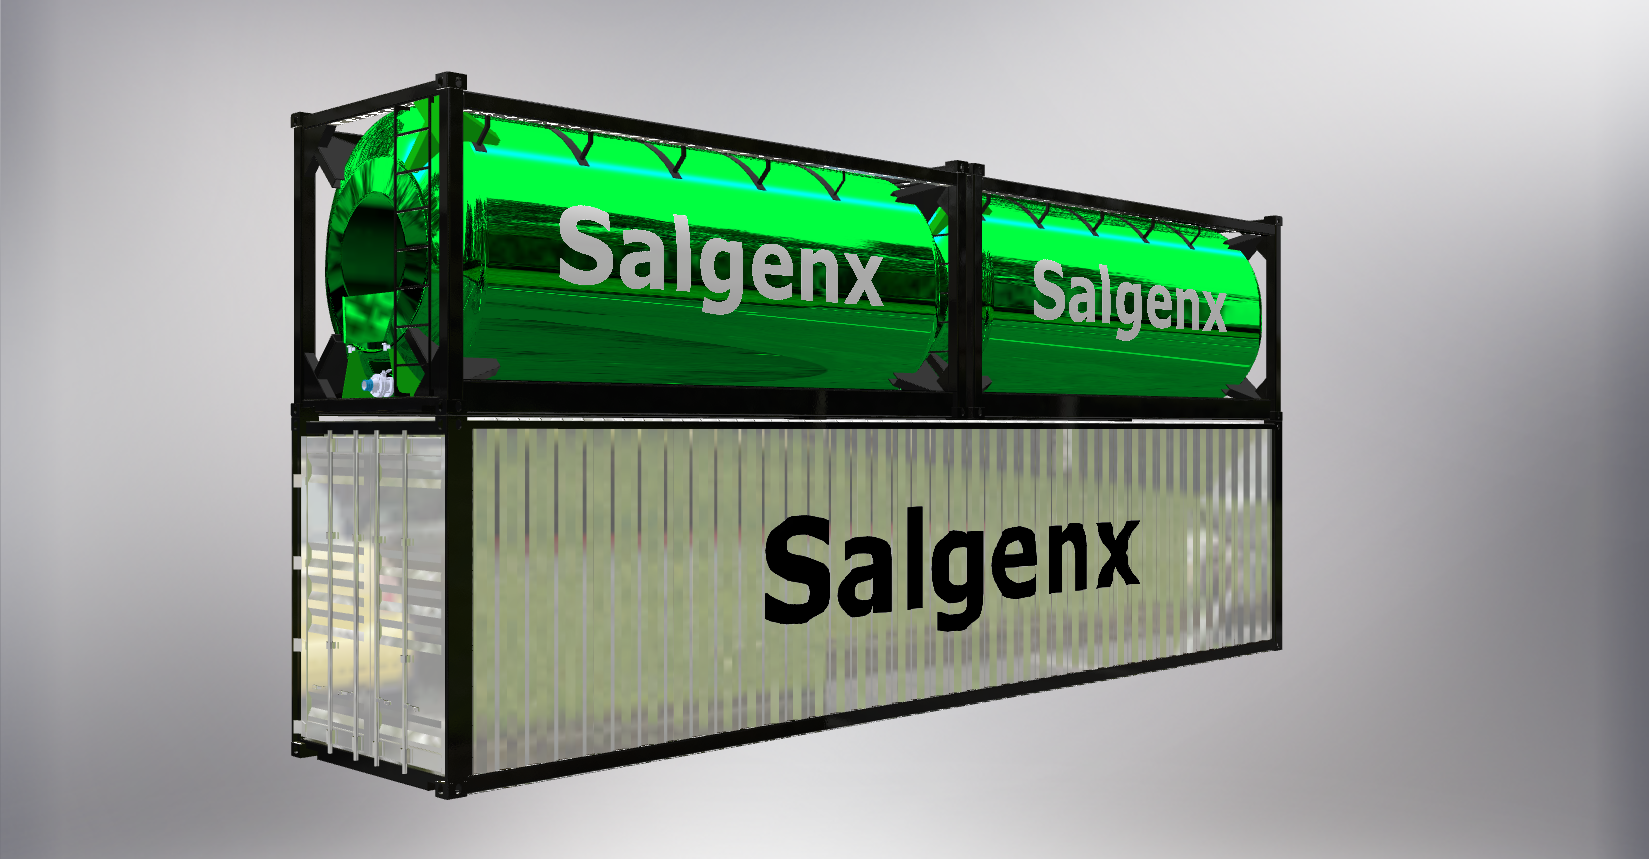 Salgenx Saltwater Flow Battery Allows Thermal Storage via use of Heat Pumps